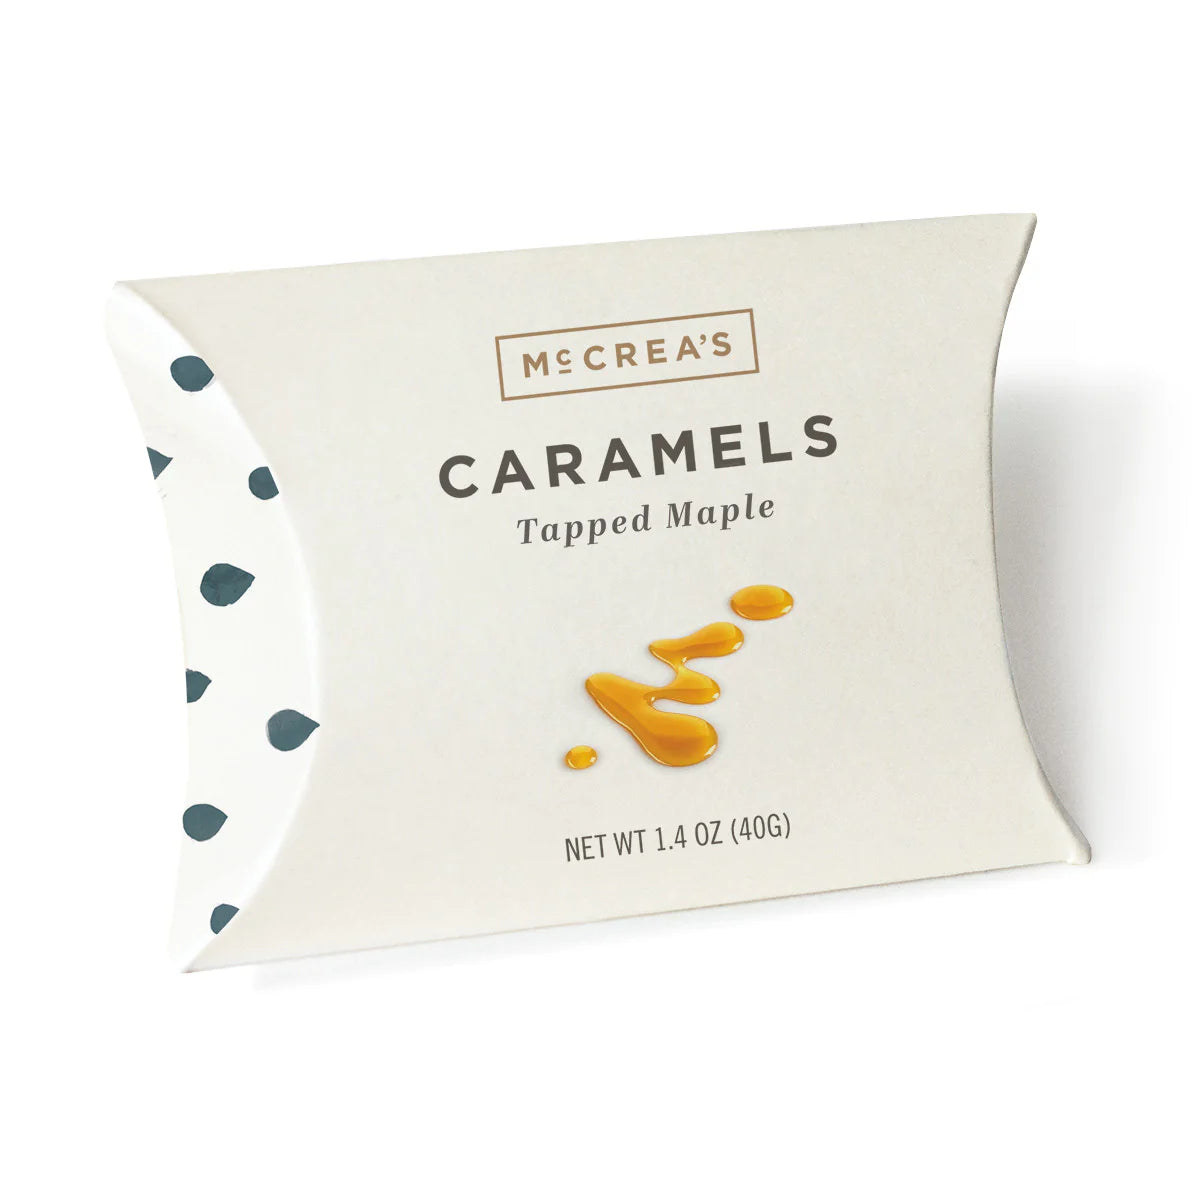 Maple Caramel Pillow Box packaging on white background.